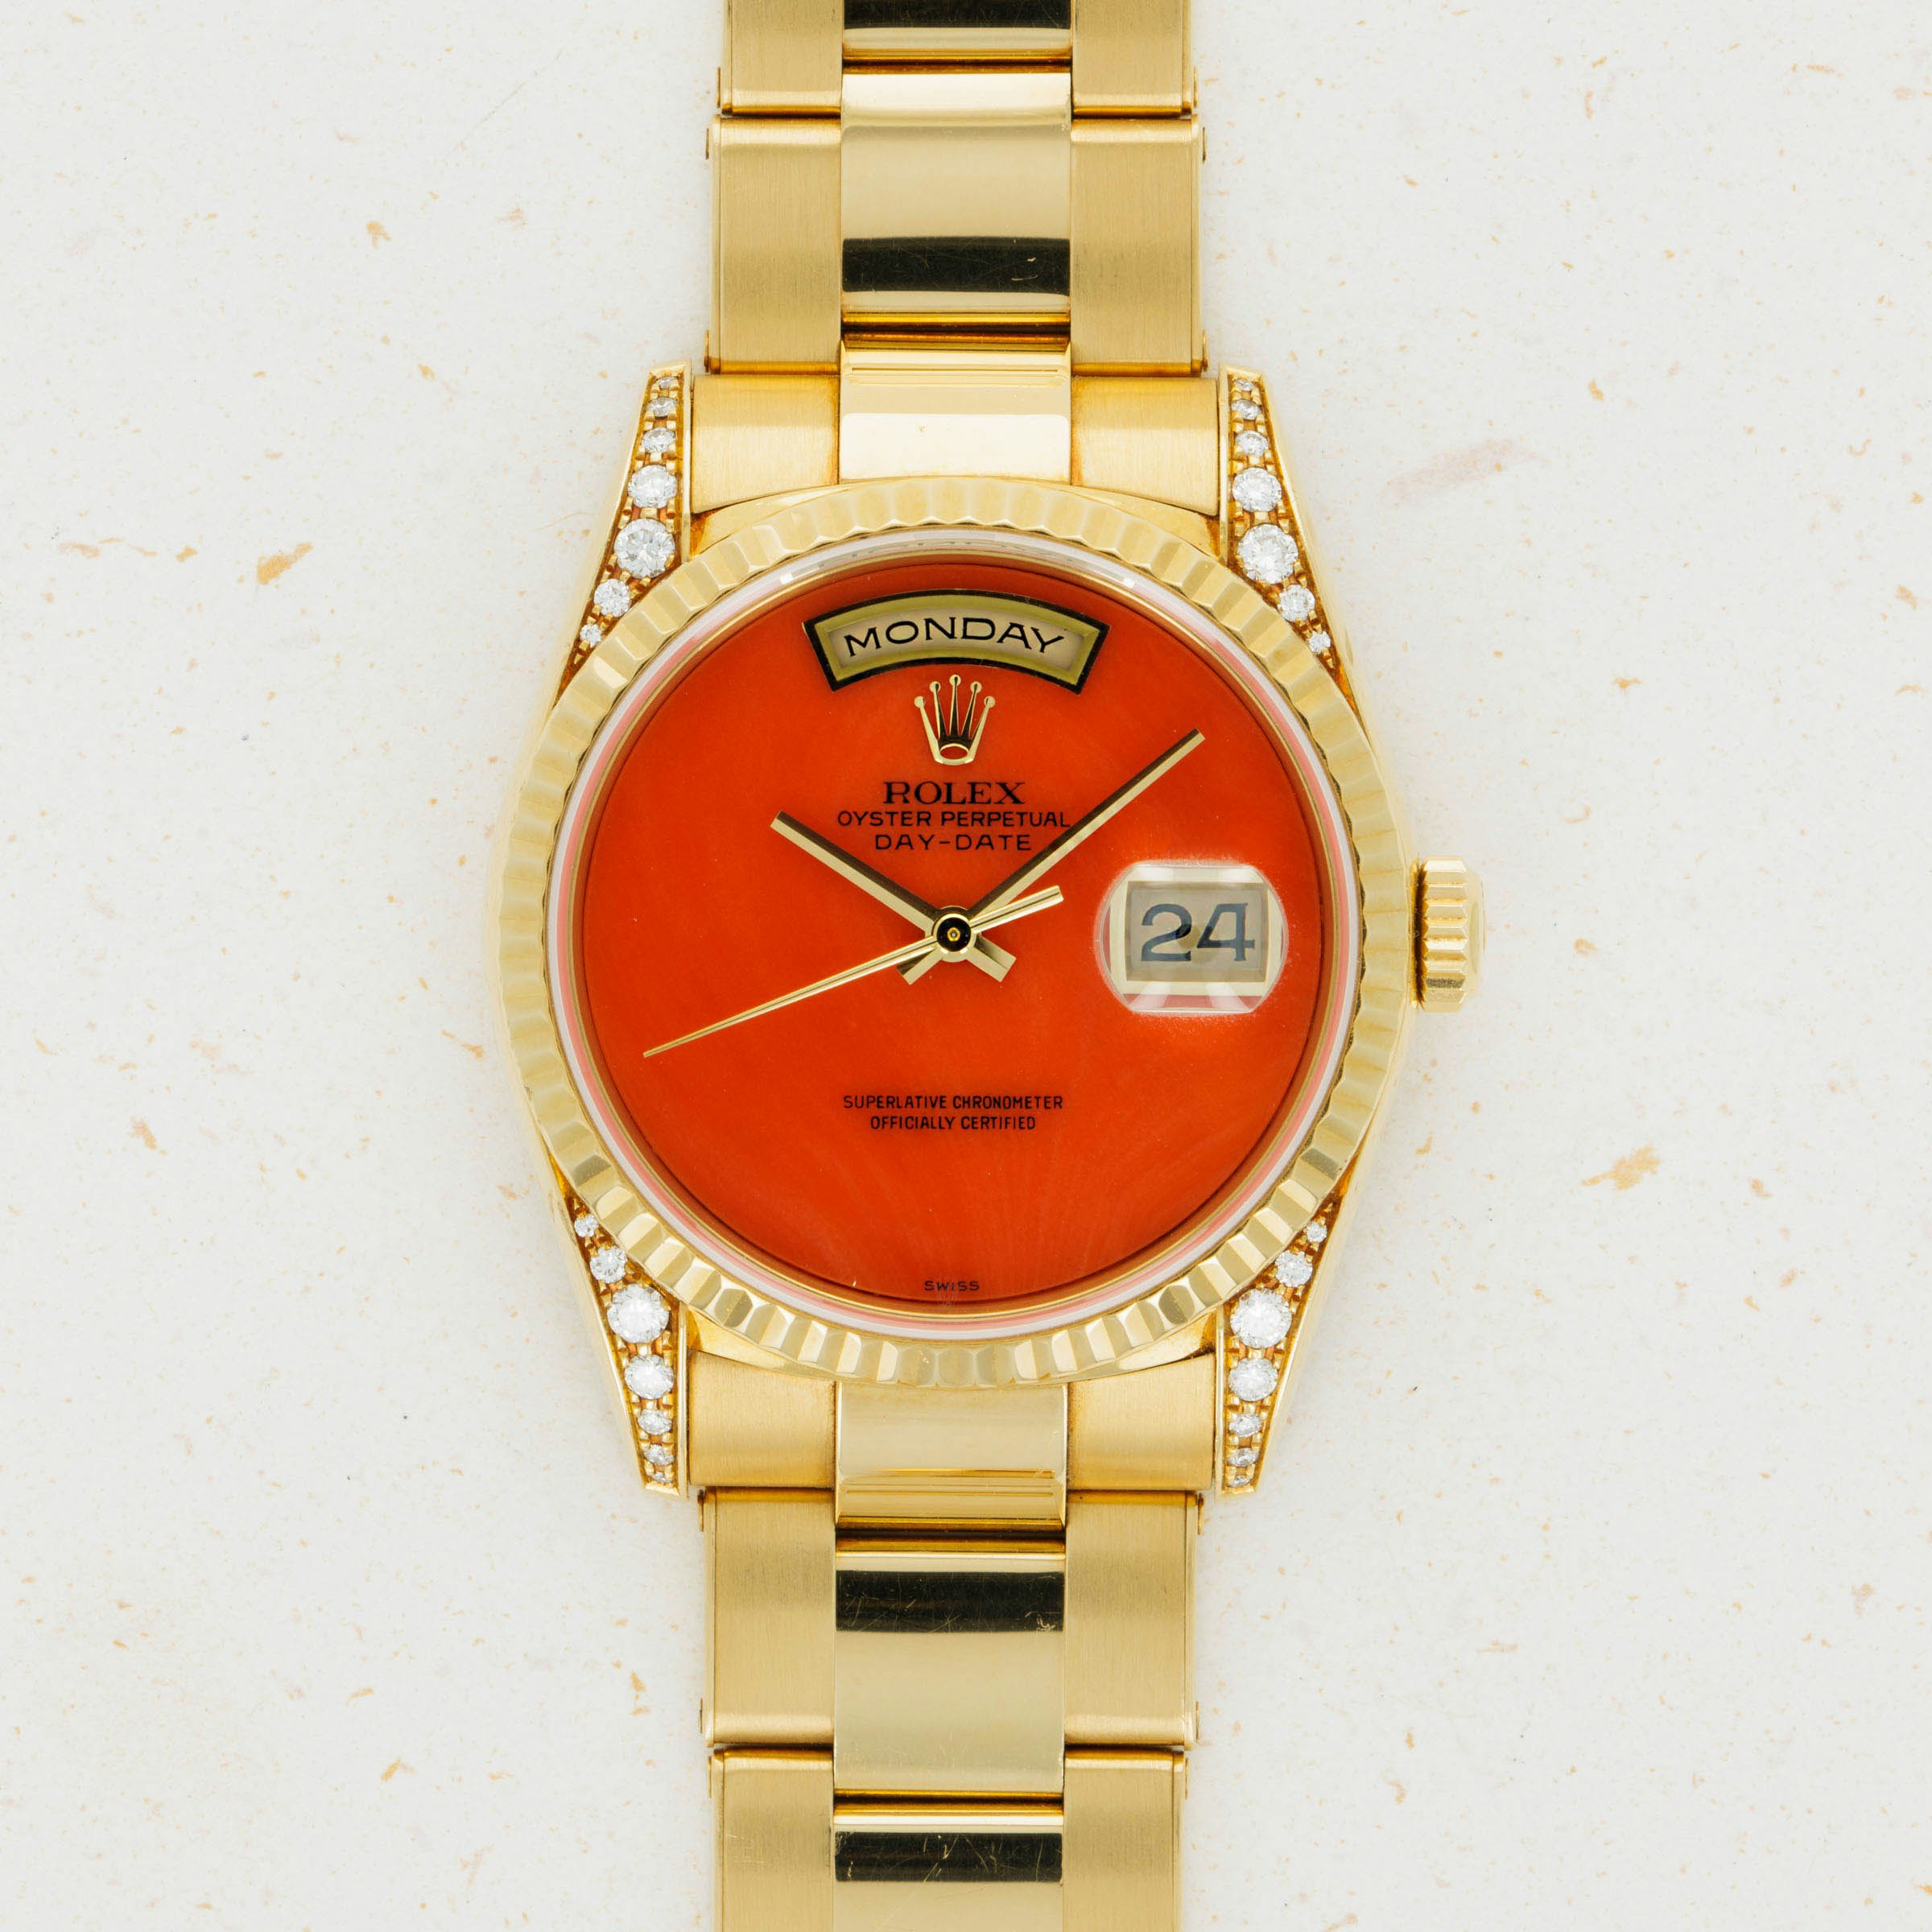 Thumbnail for Rolex Day-Date Coral Dial Diamond Lugs 18338 with Guarantee Certificate